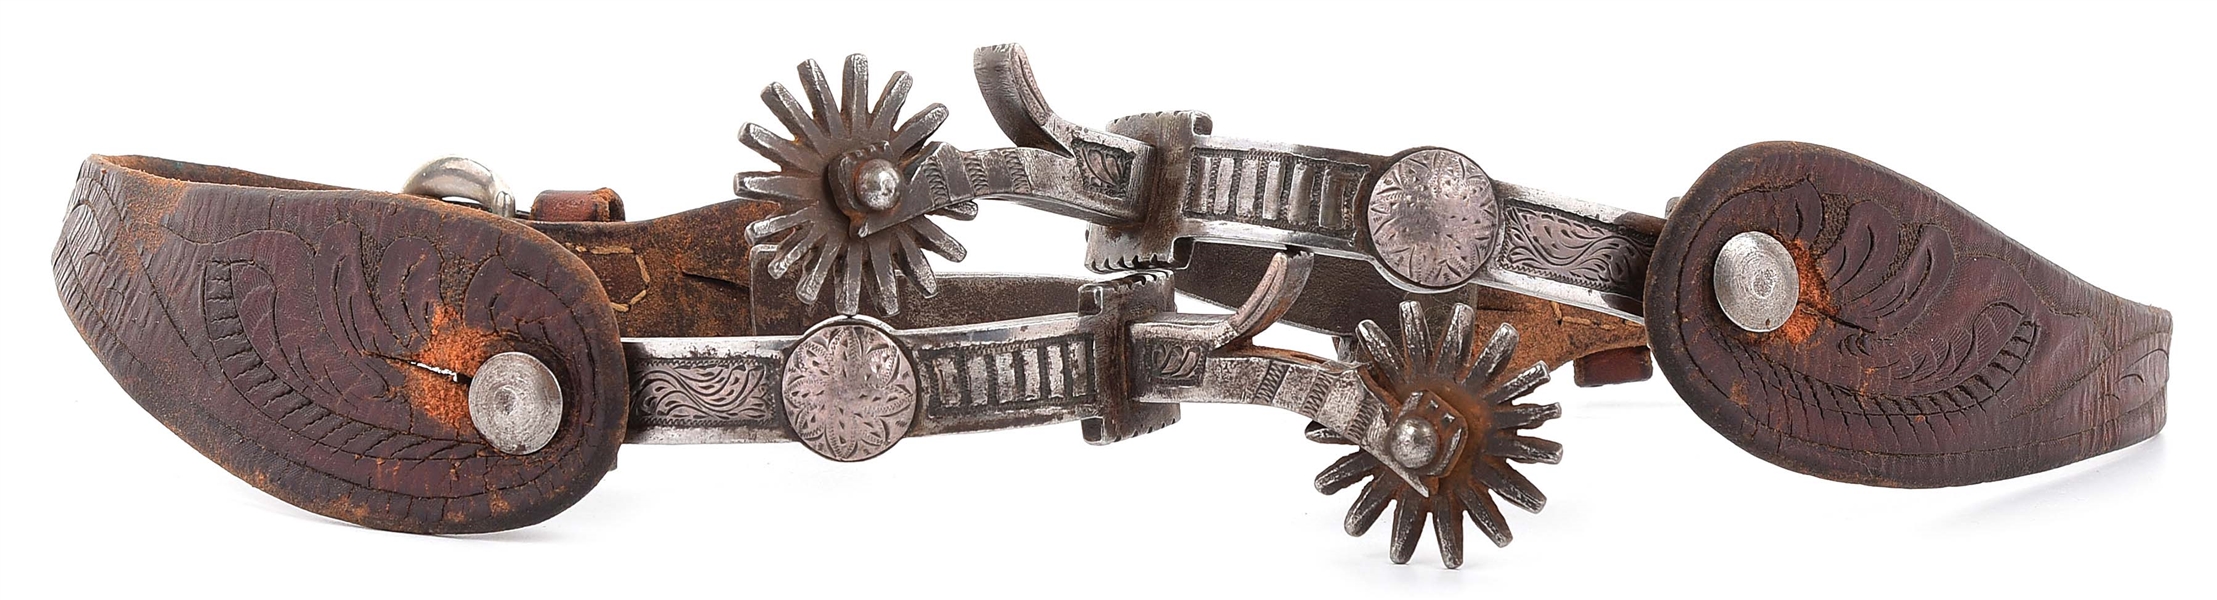 UNUSUAL SILVER INLAID SPURS